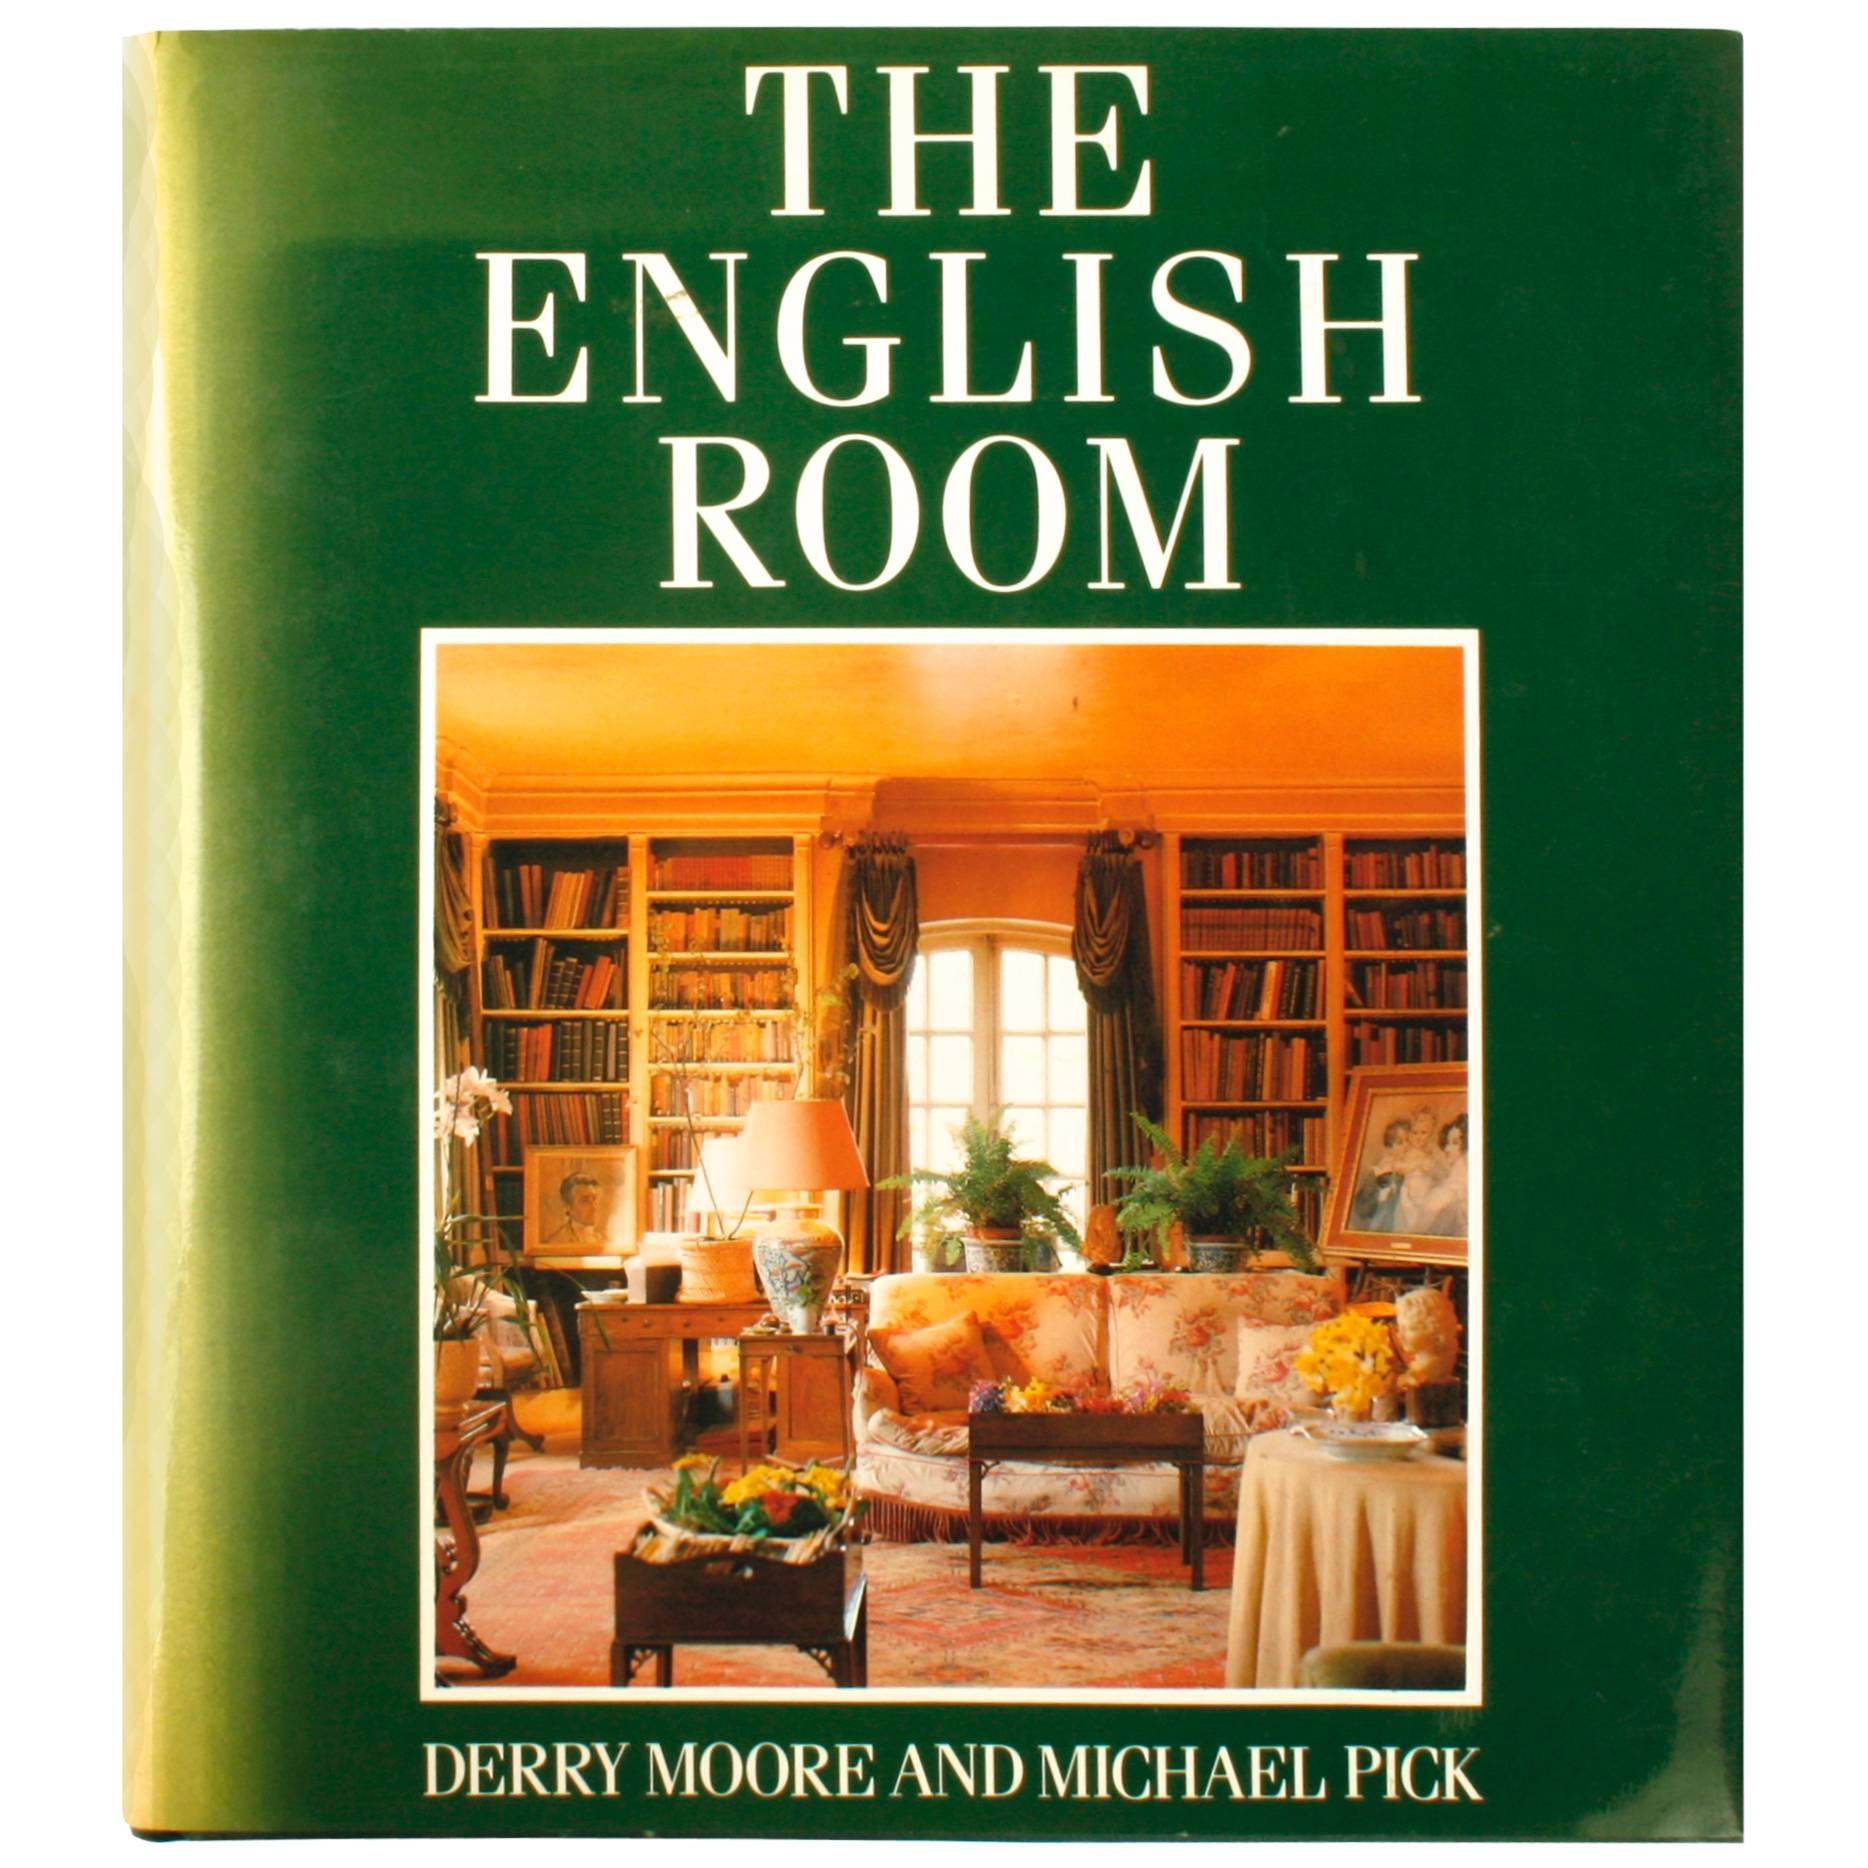 English Room by Derry Moore and Michael Pick, First Edition